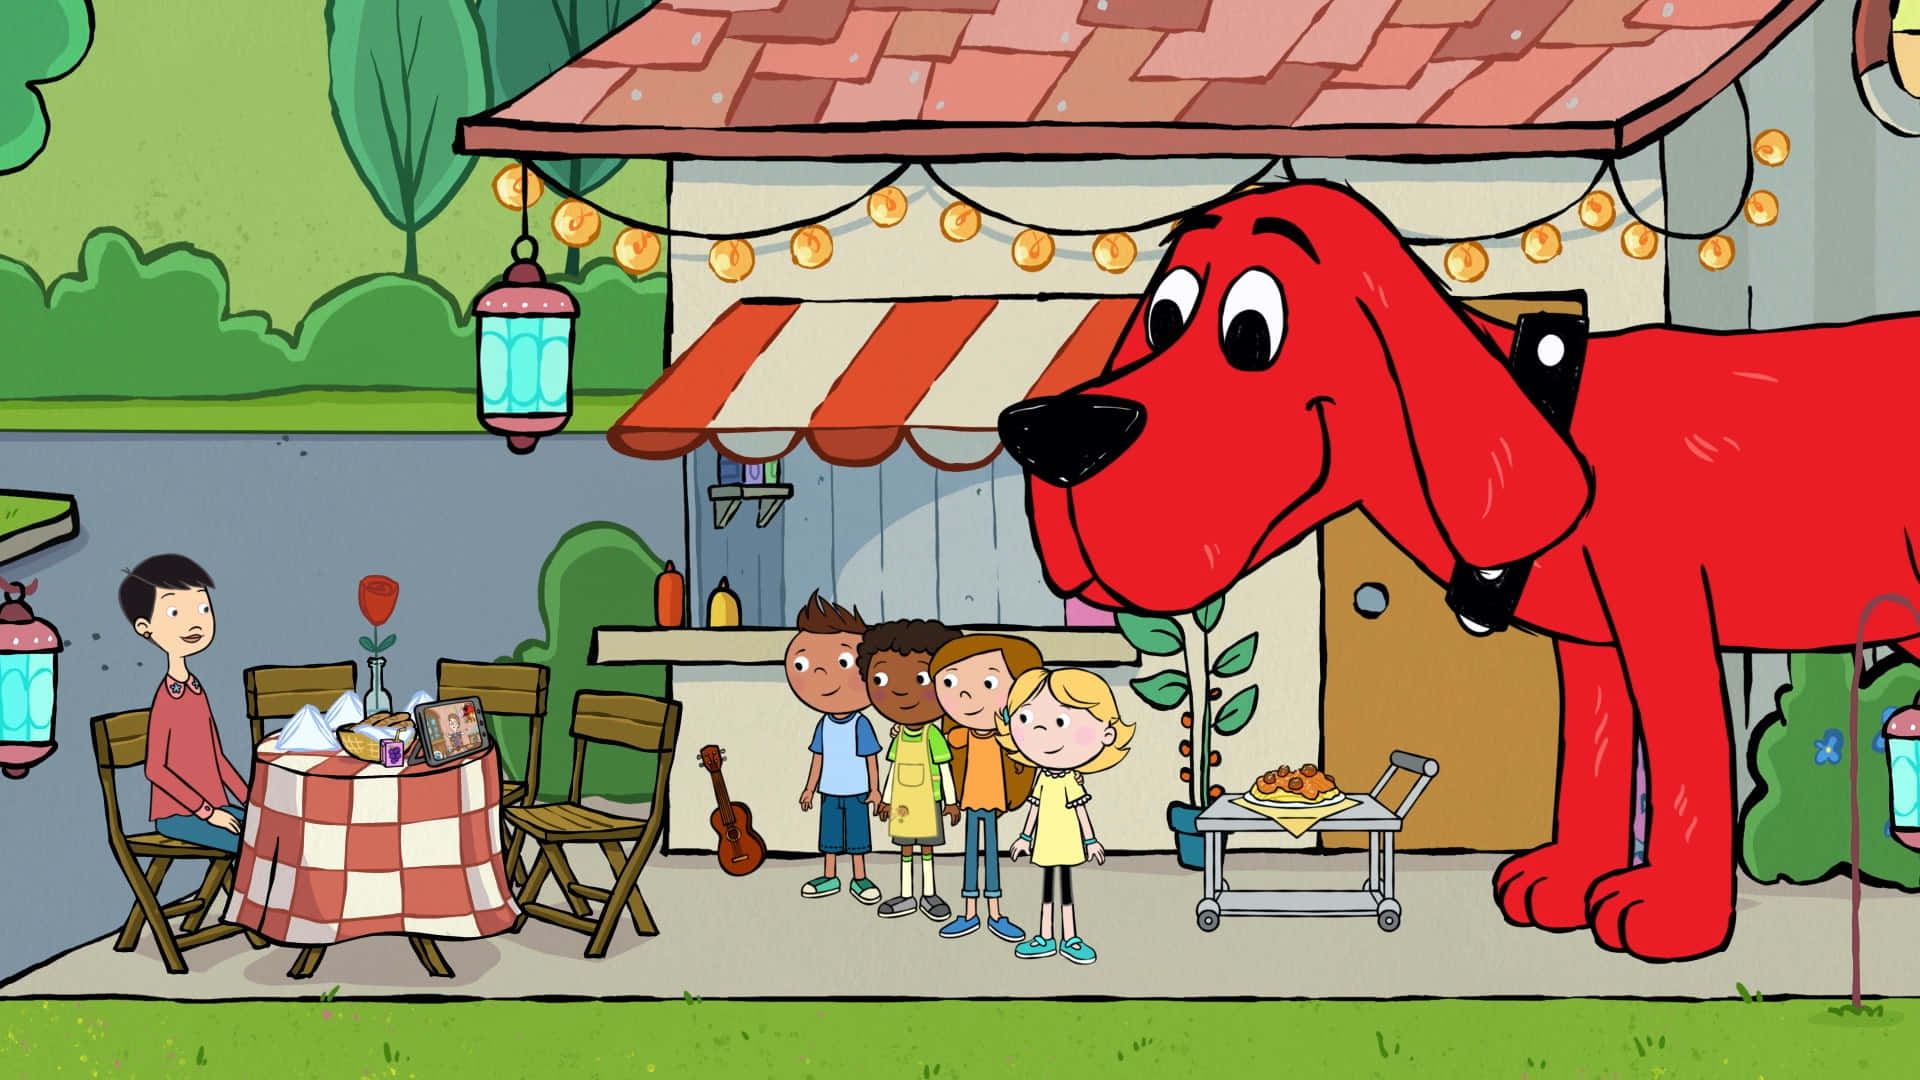 Clifford the Big Red Dog is ready for Adventure!